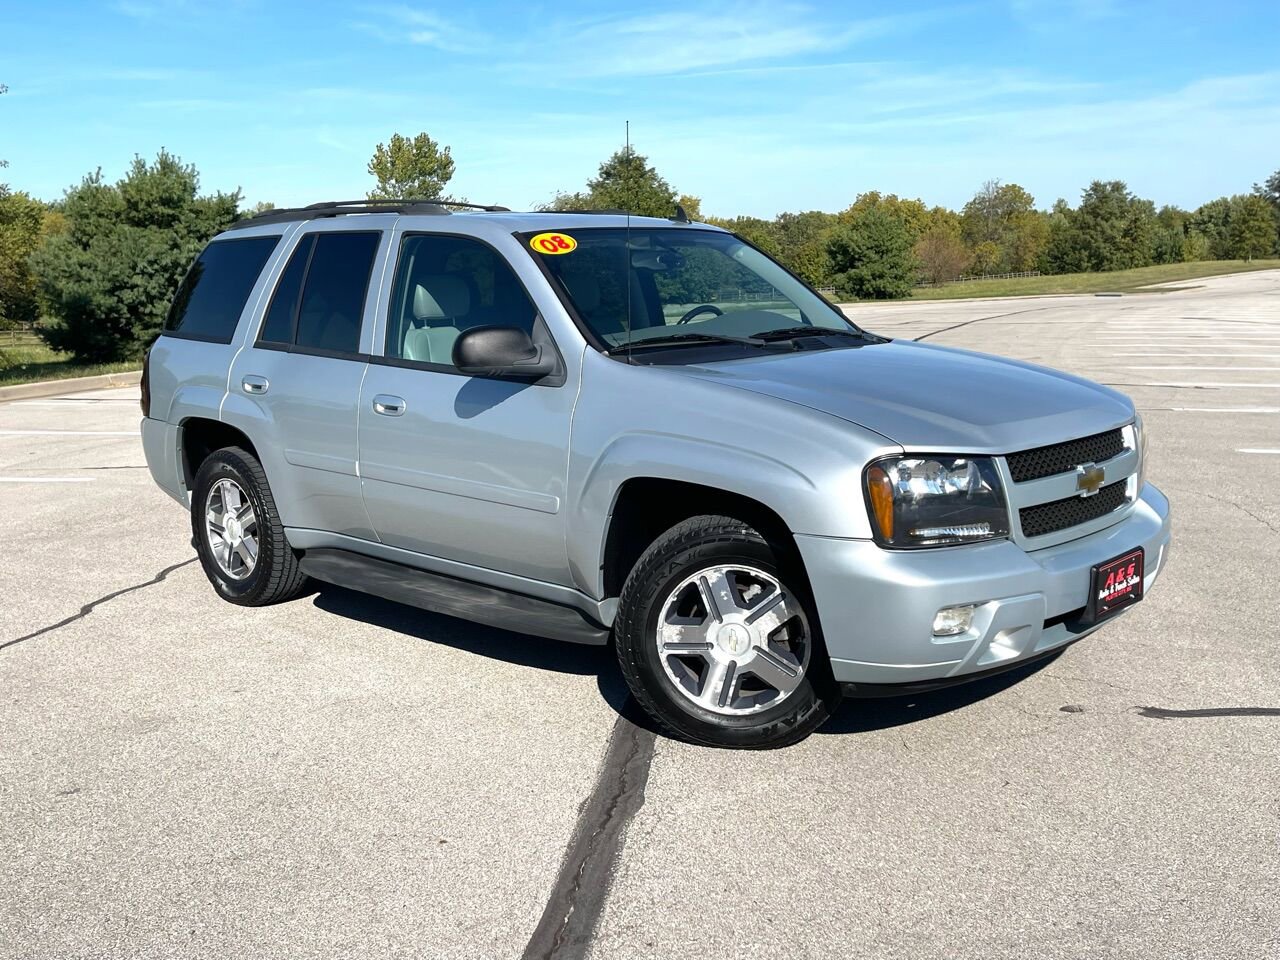 Used 2008 Chevrolet TrailBlazer for Sale Right Now - Autotrader